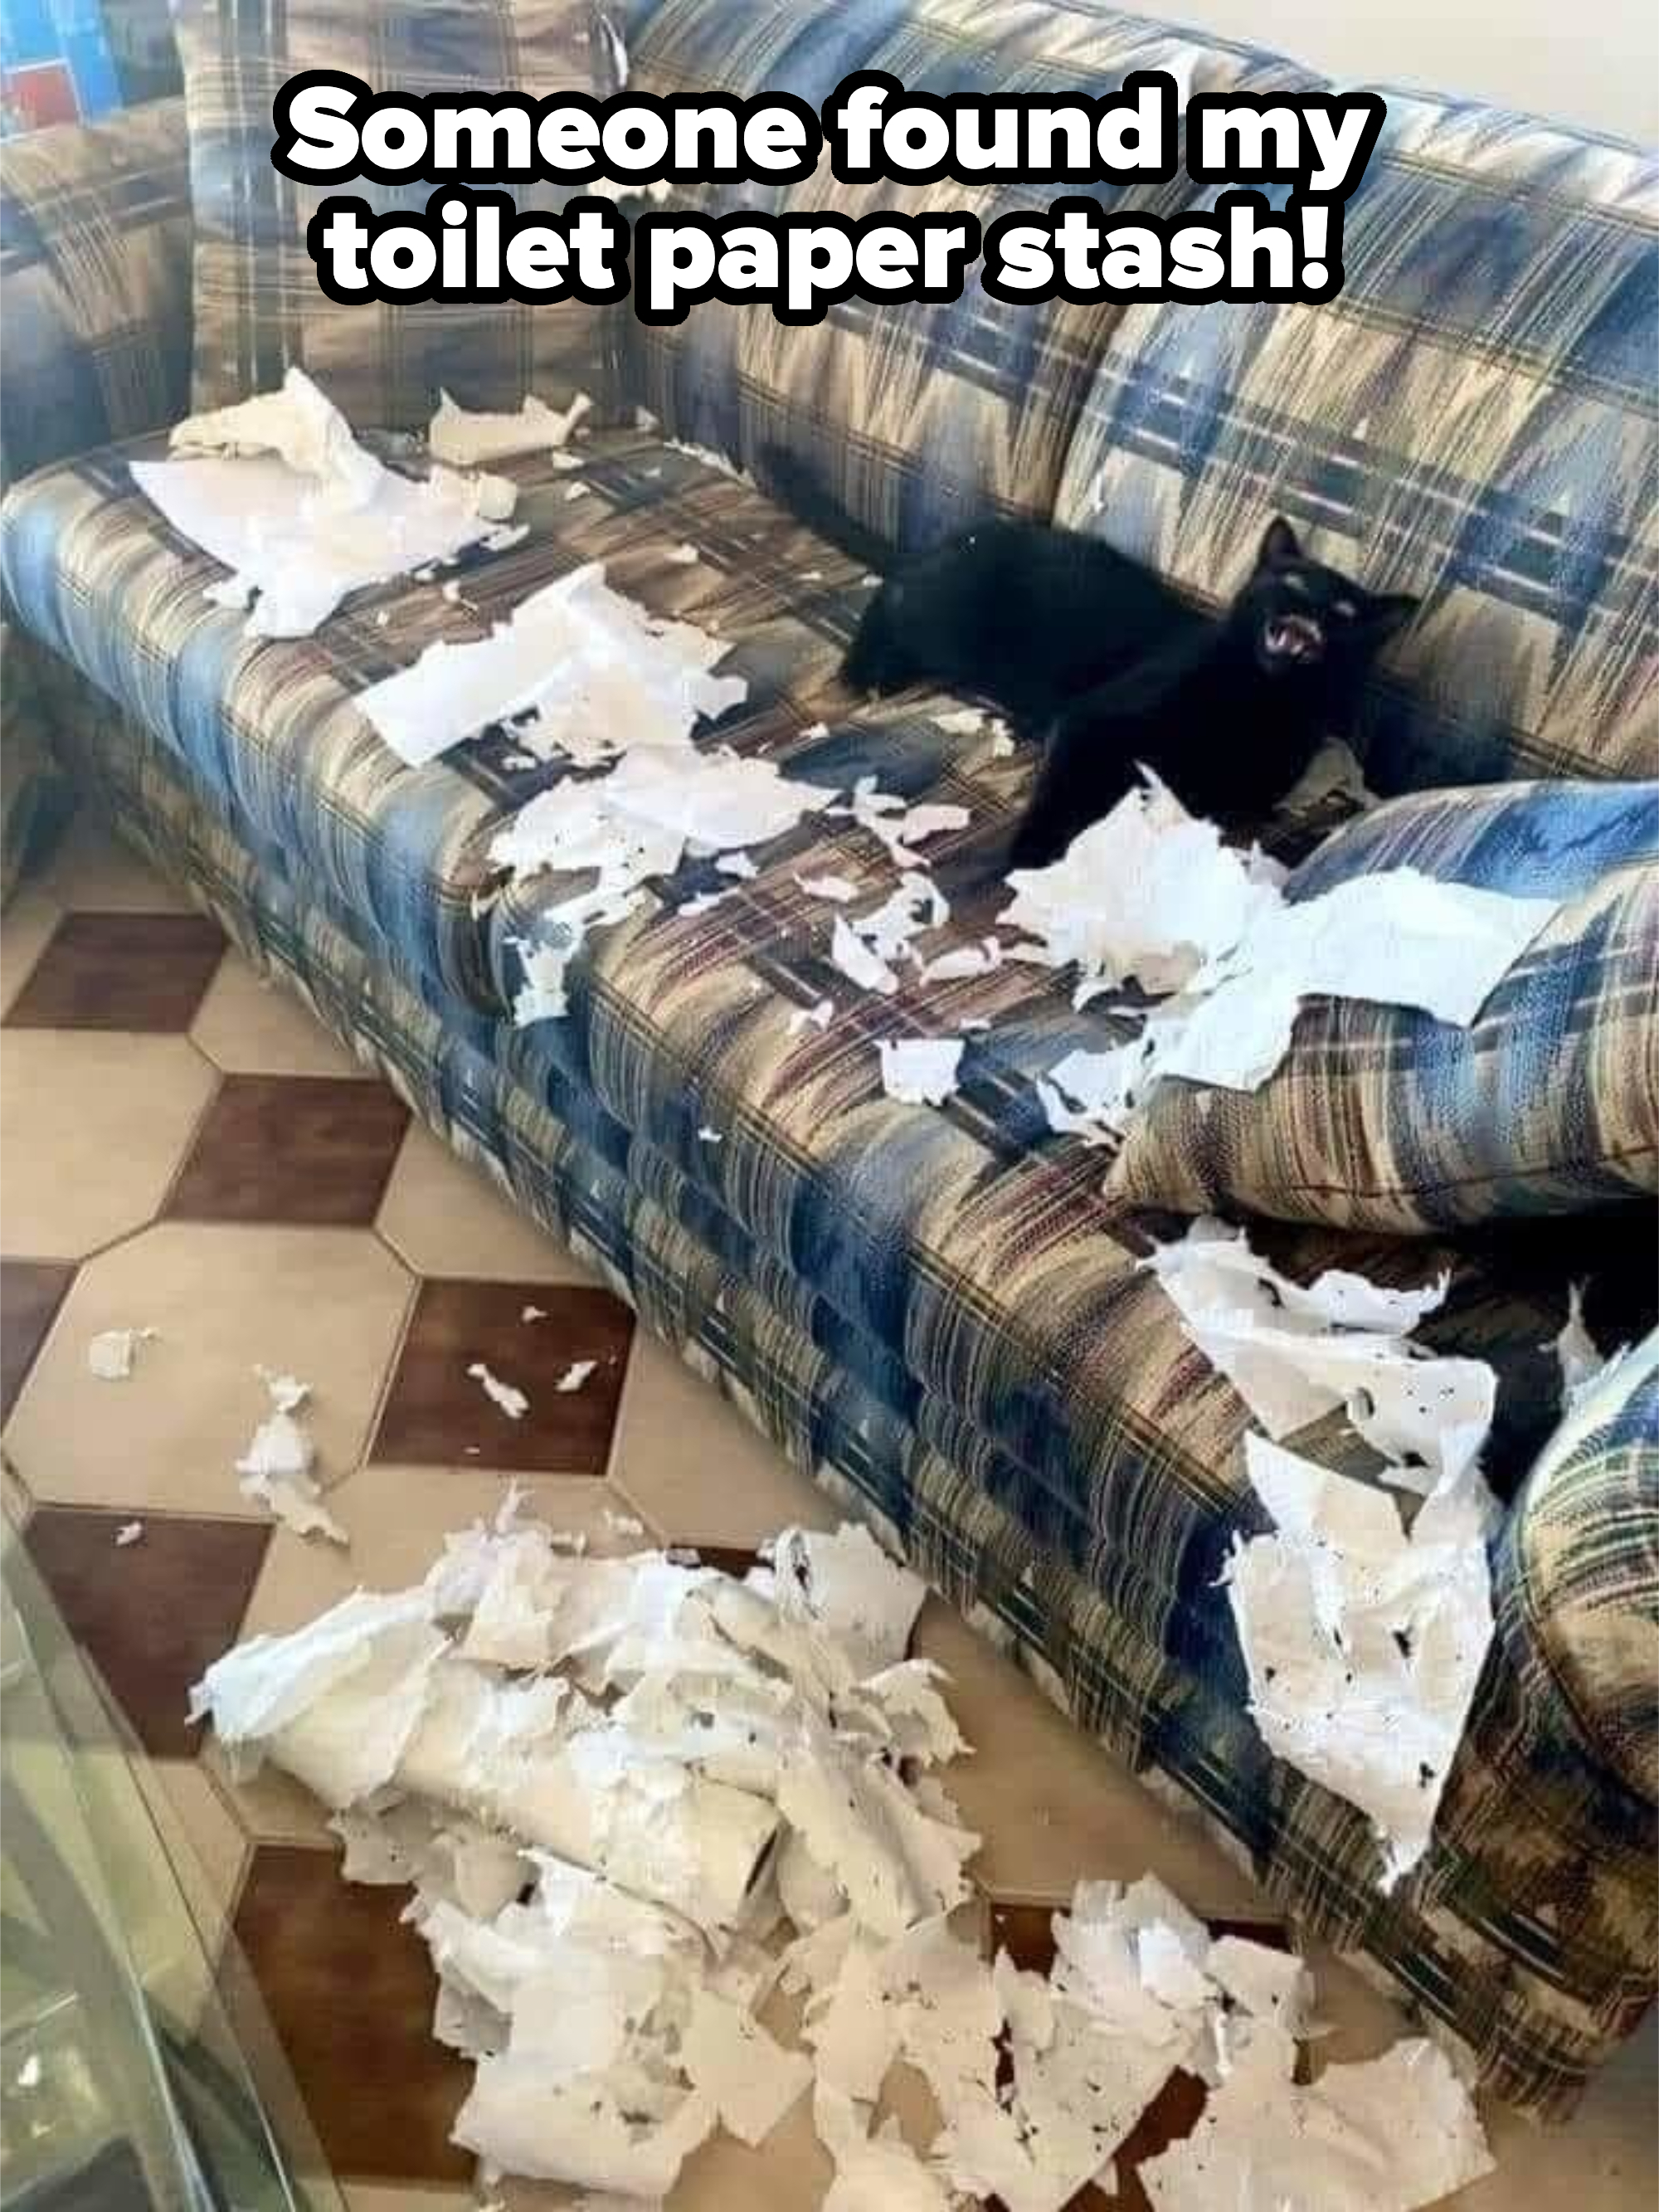 A black cat lies on a plaid couch surrounded by ripped pieces of white paper scattered across the couch and floor